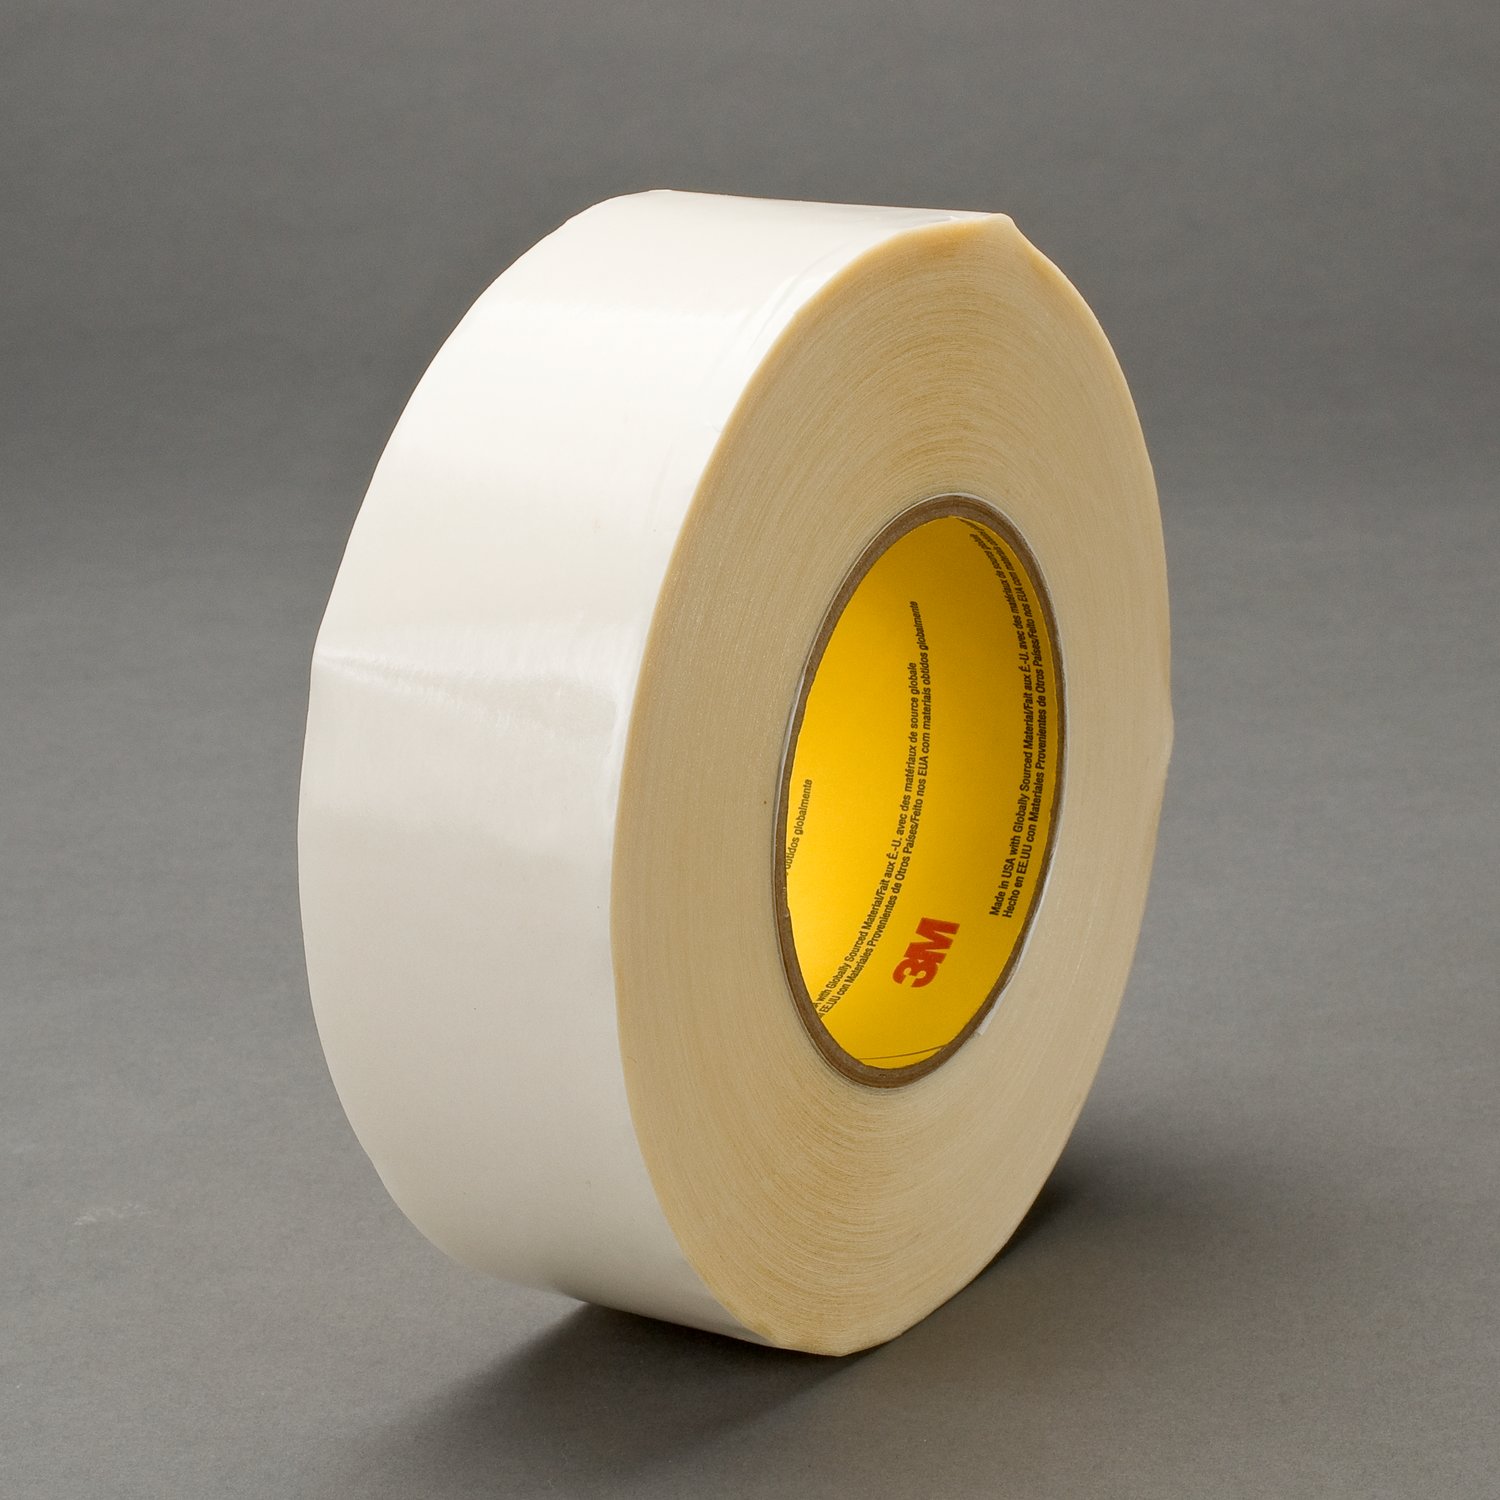 7010334951 - 3M Double Coated Tape 9741, Clear, 72 mm x 55 m, 6.5 mil, 16 rolls per
case